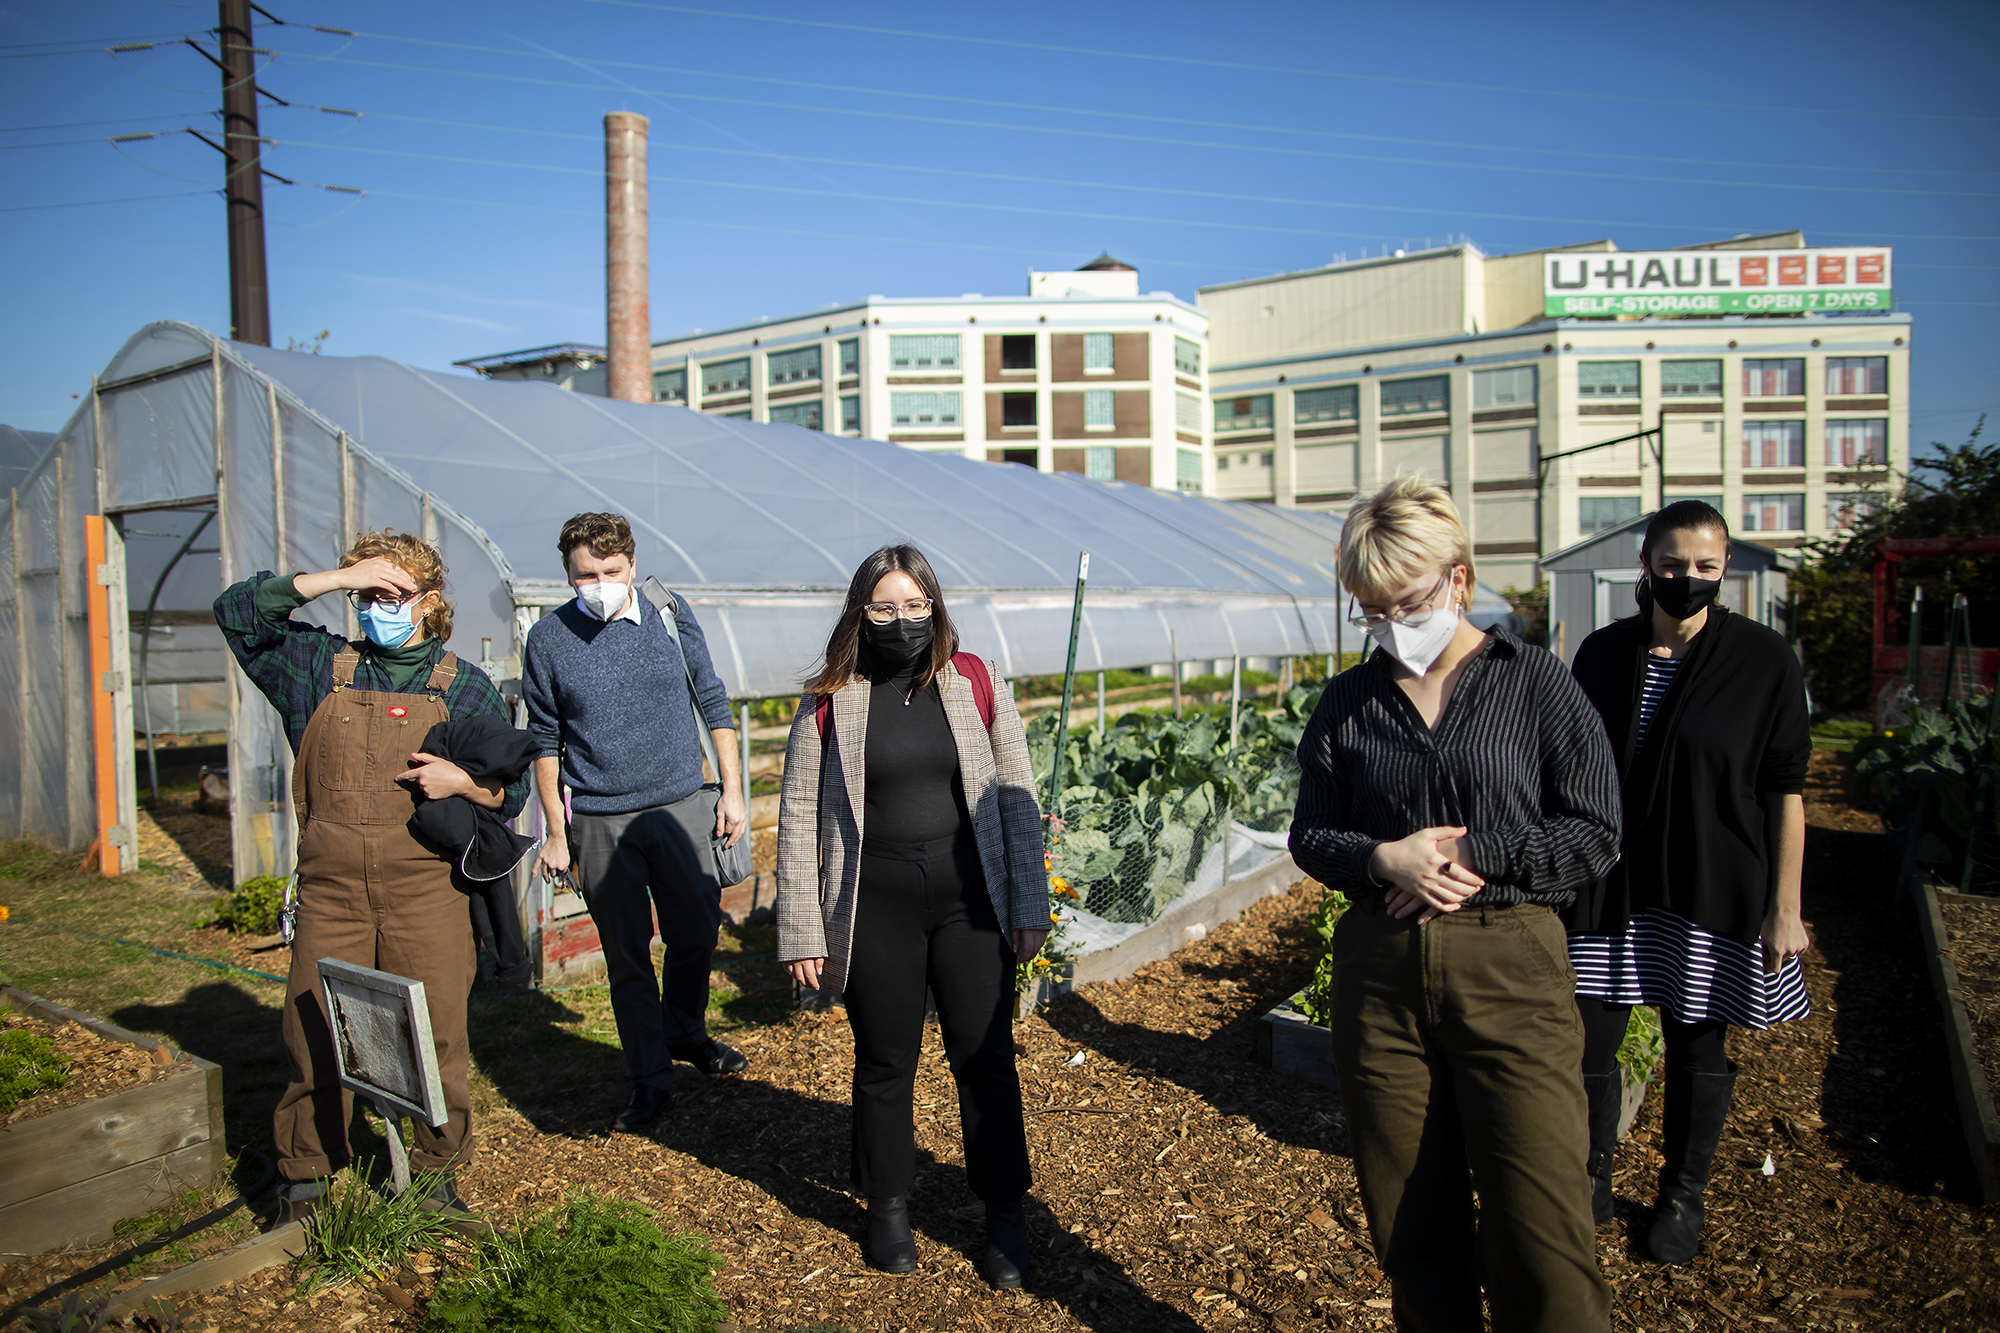 Five people stand in an urban garden with storage facilities in the background